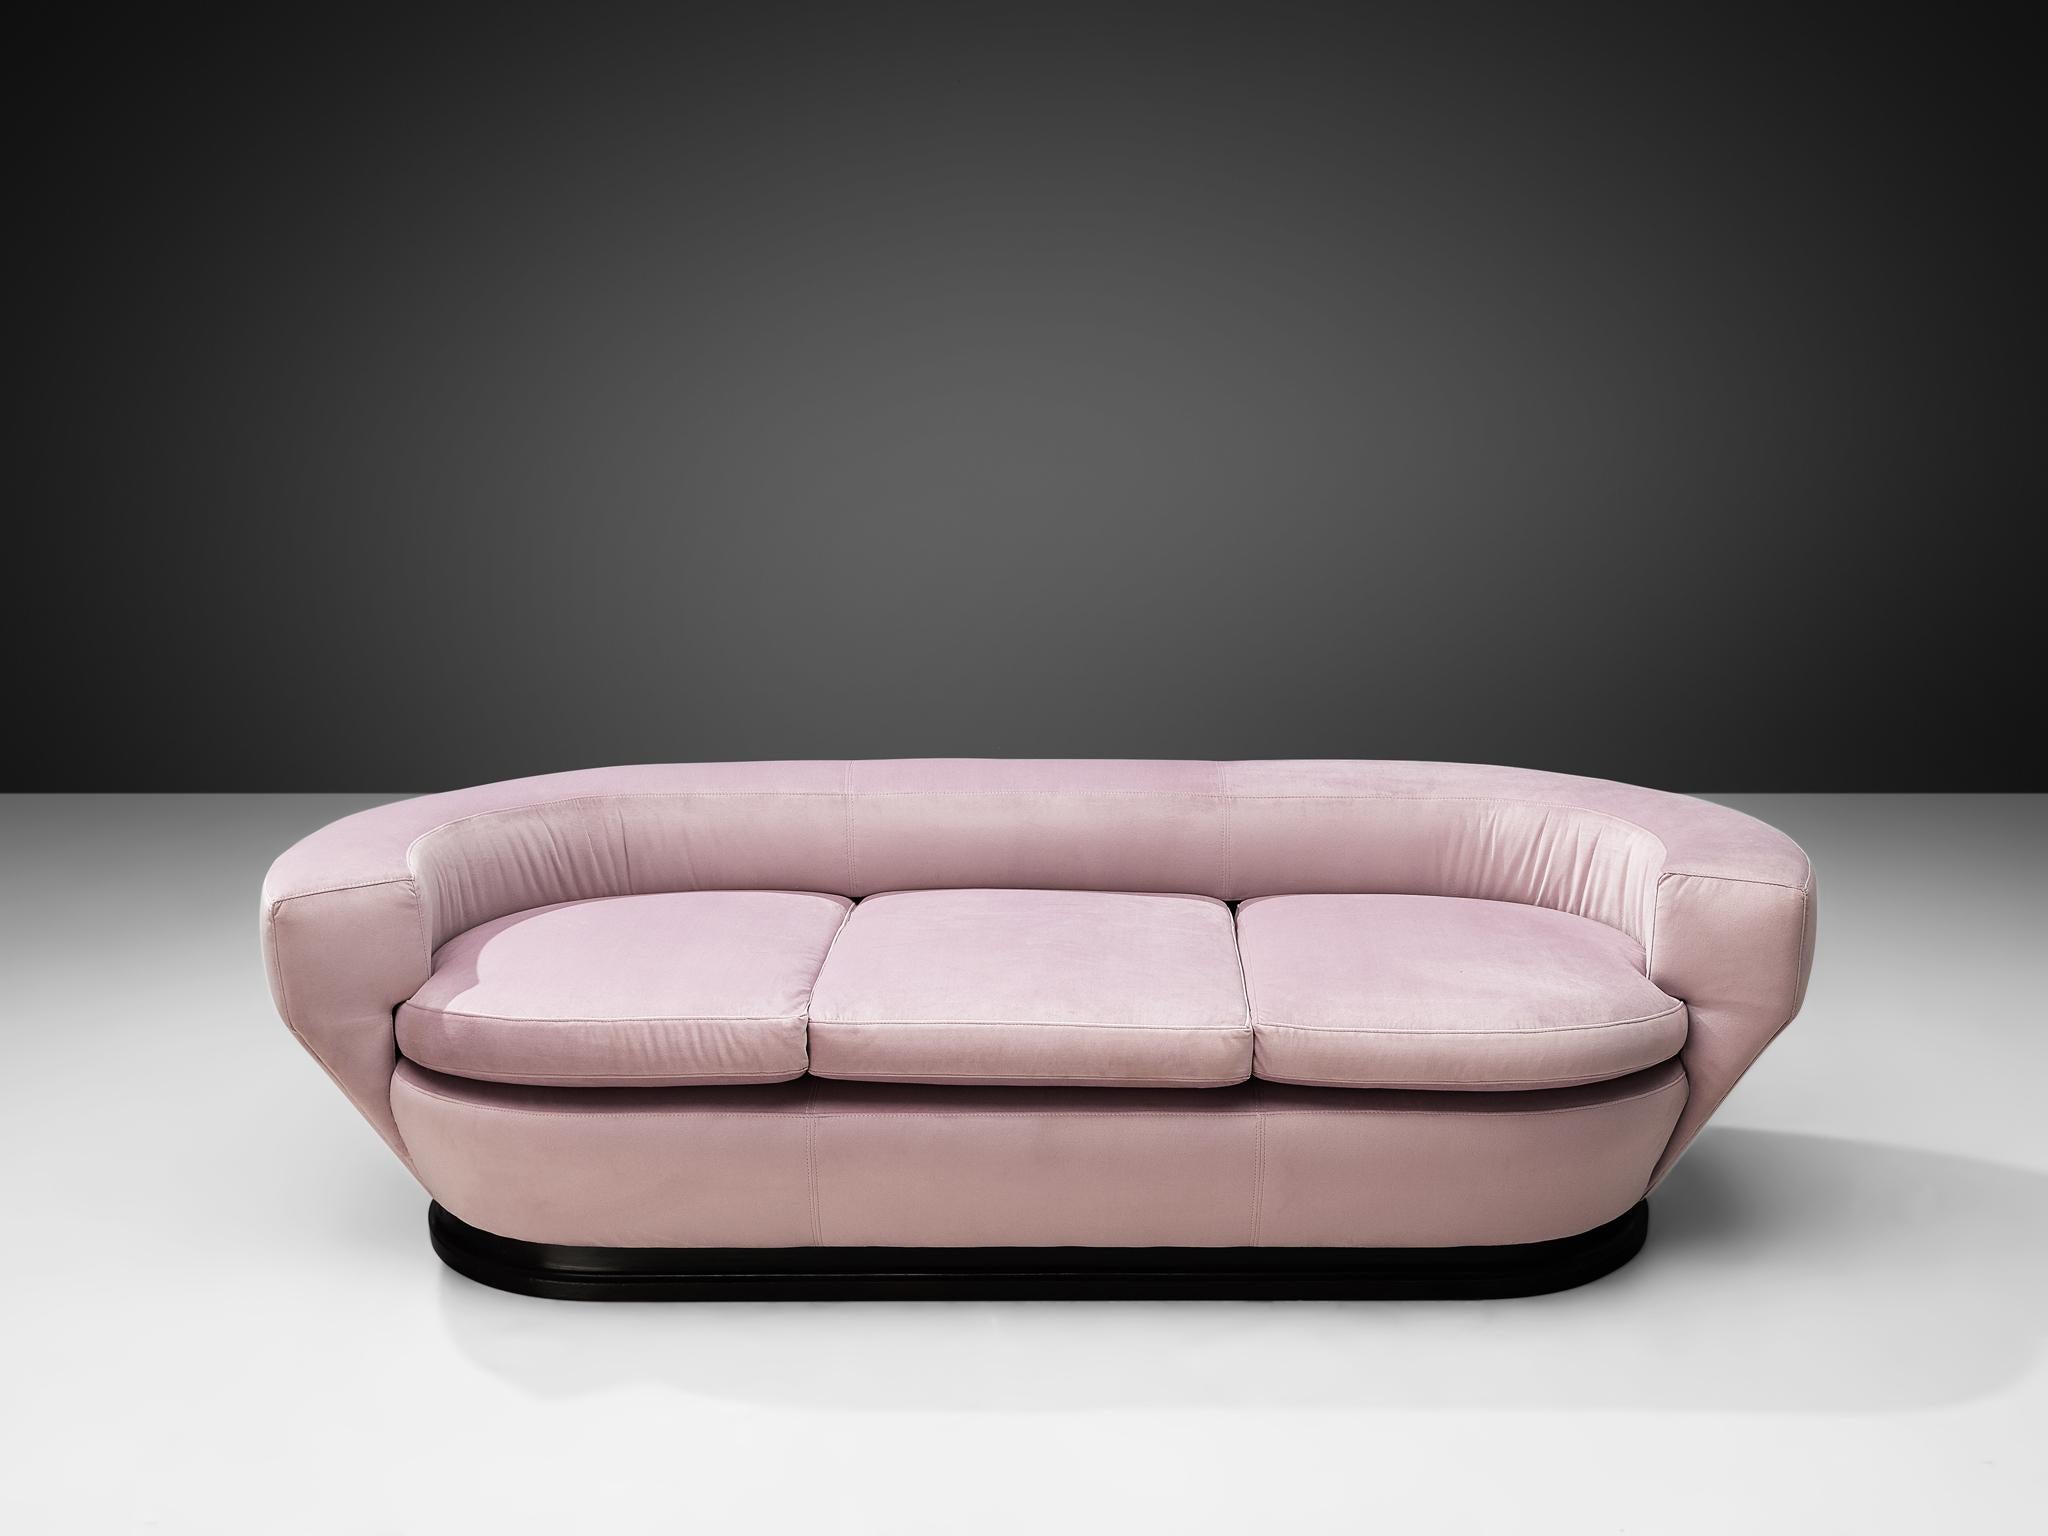 Three-seat sofa, velour upholstery, darkened wood, Italy, 1960s.

This Italian sofa has three seats, an elegant tapered base and a low backrest. The backrest surrounds the seatings and merges seamlessly in to the armrests. The base rests on a